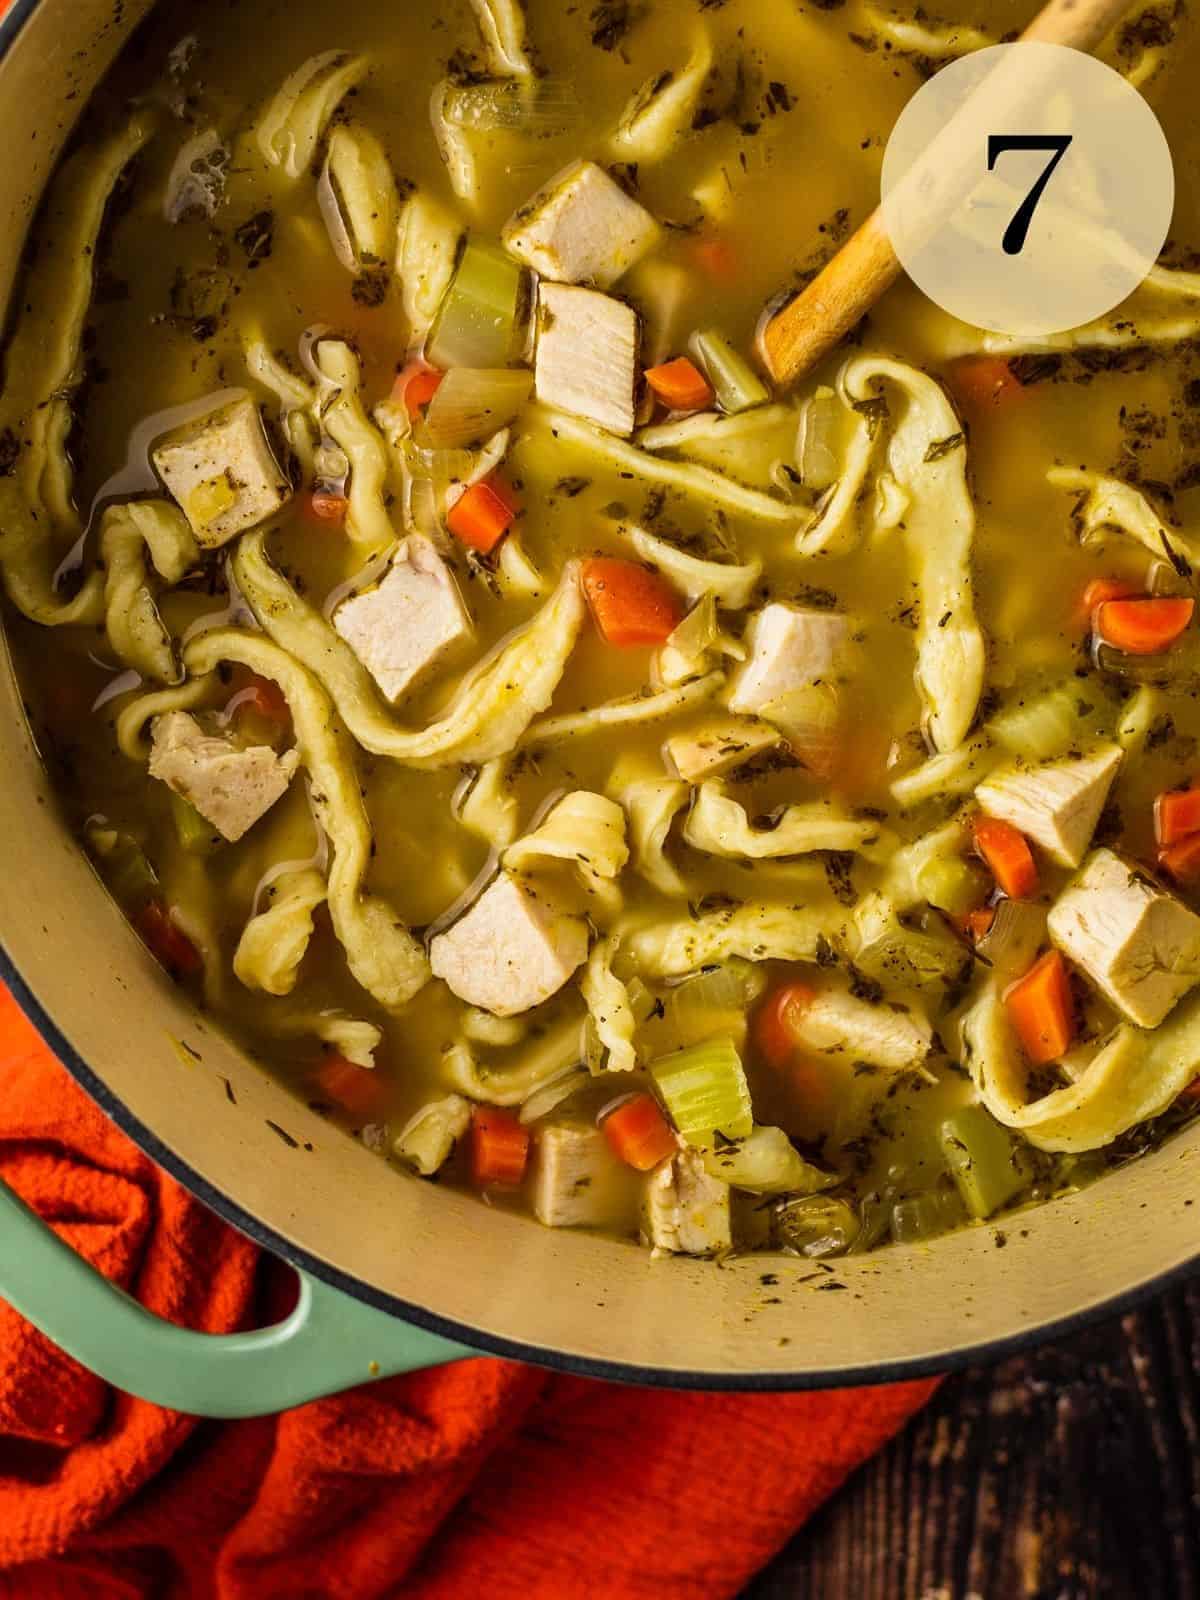 pieces of chicken mixed in with vegetables, noodles and broth in a pot